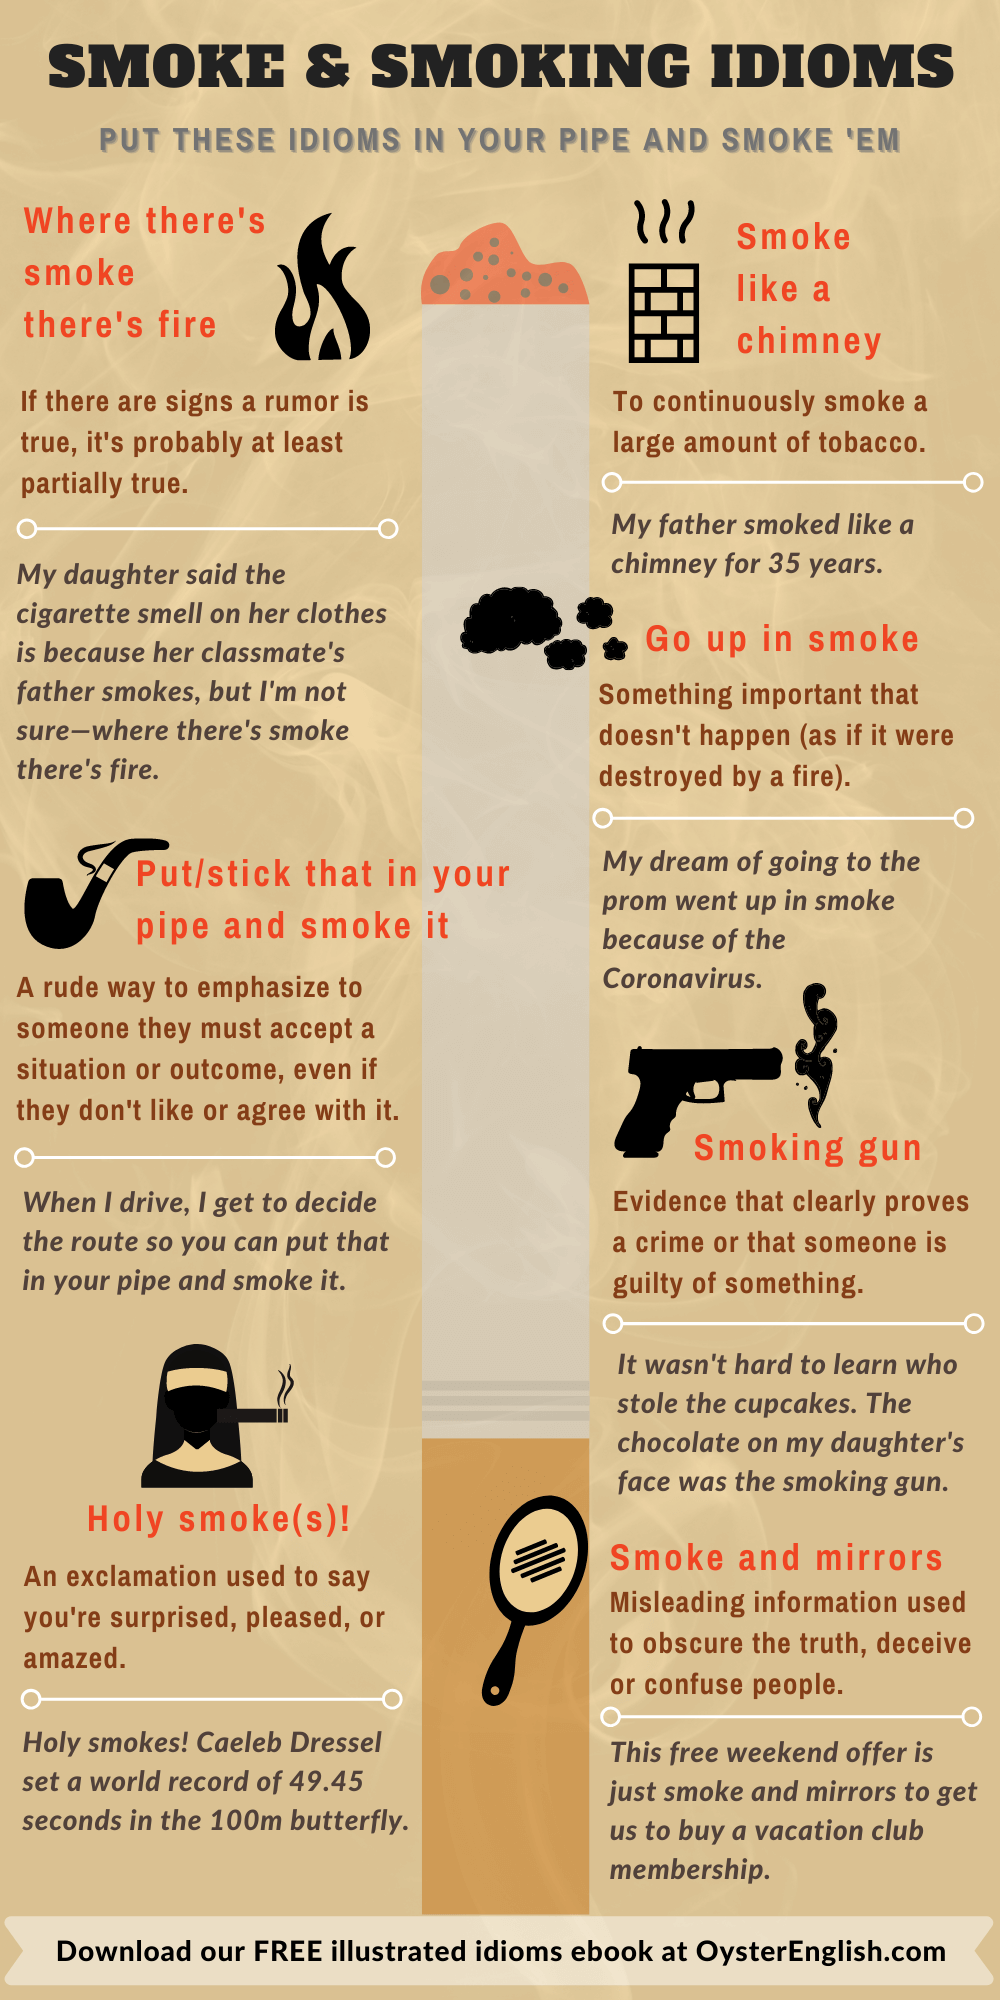 An infographic with definitions and sentence examples of the 7 smoke-related idioms listed on this page.